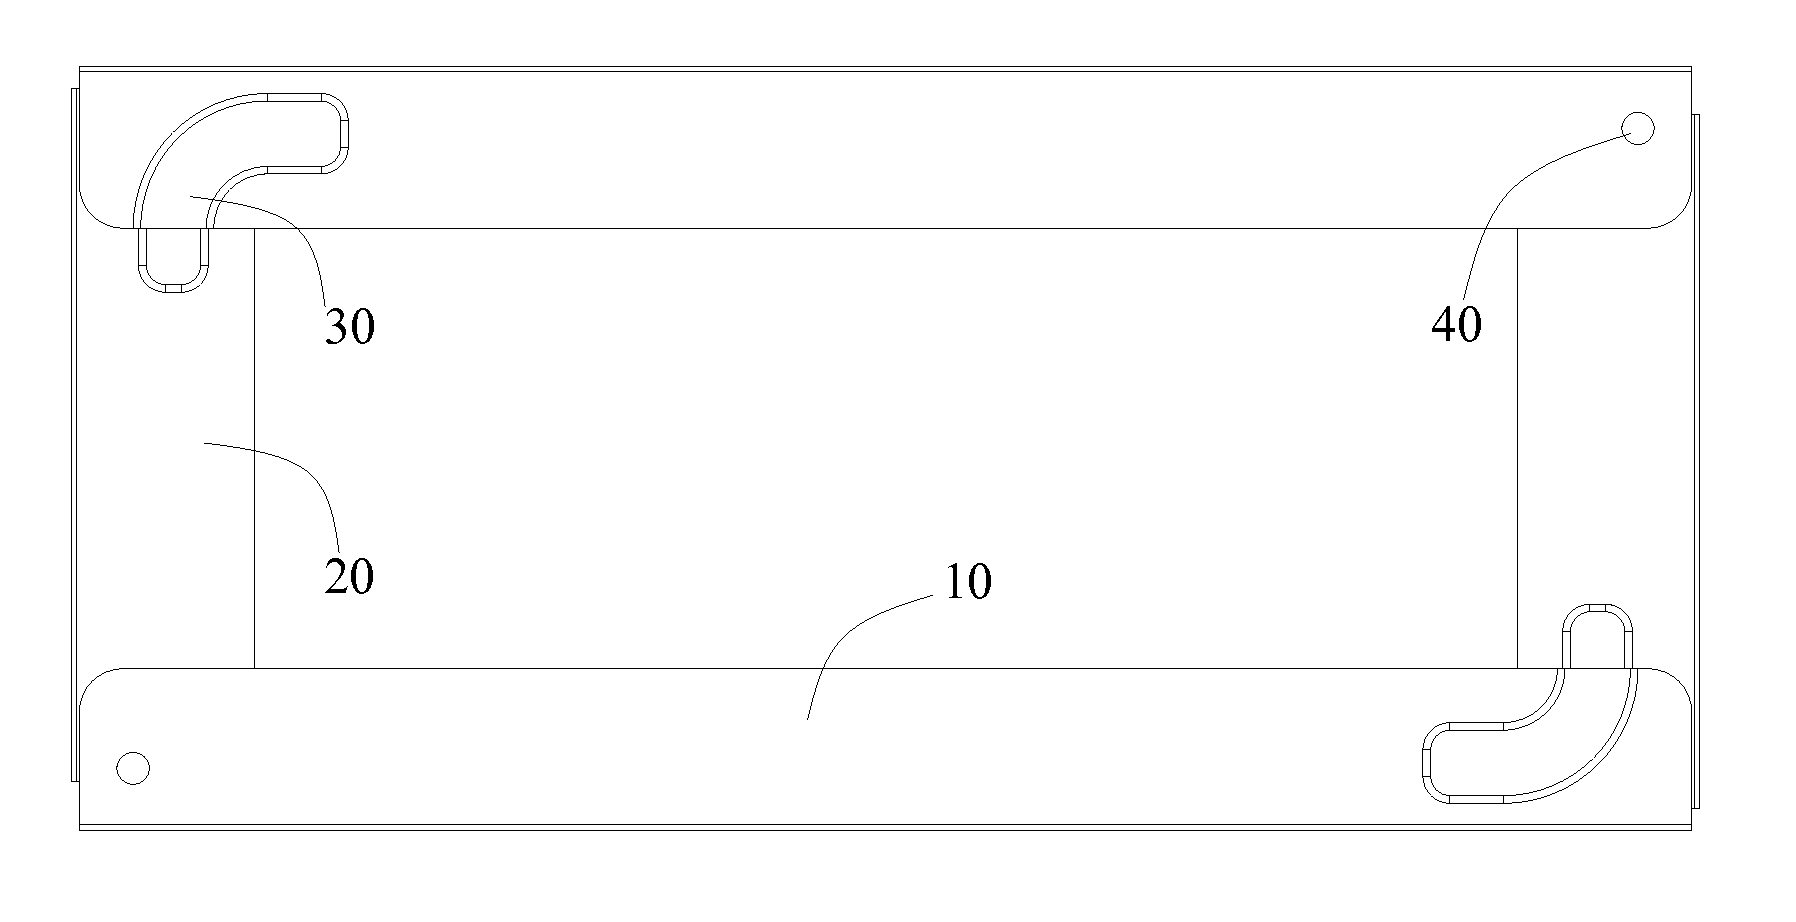 Display backplane and LCD device